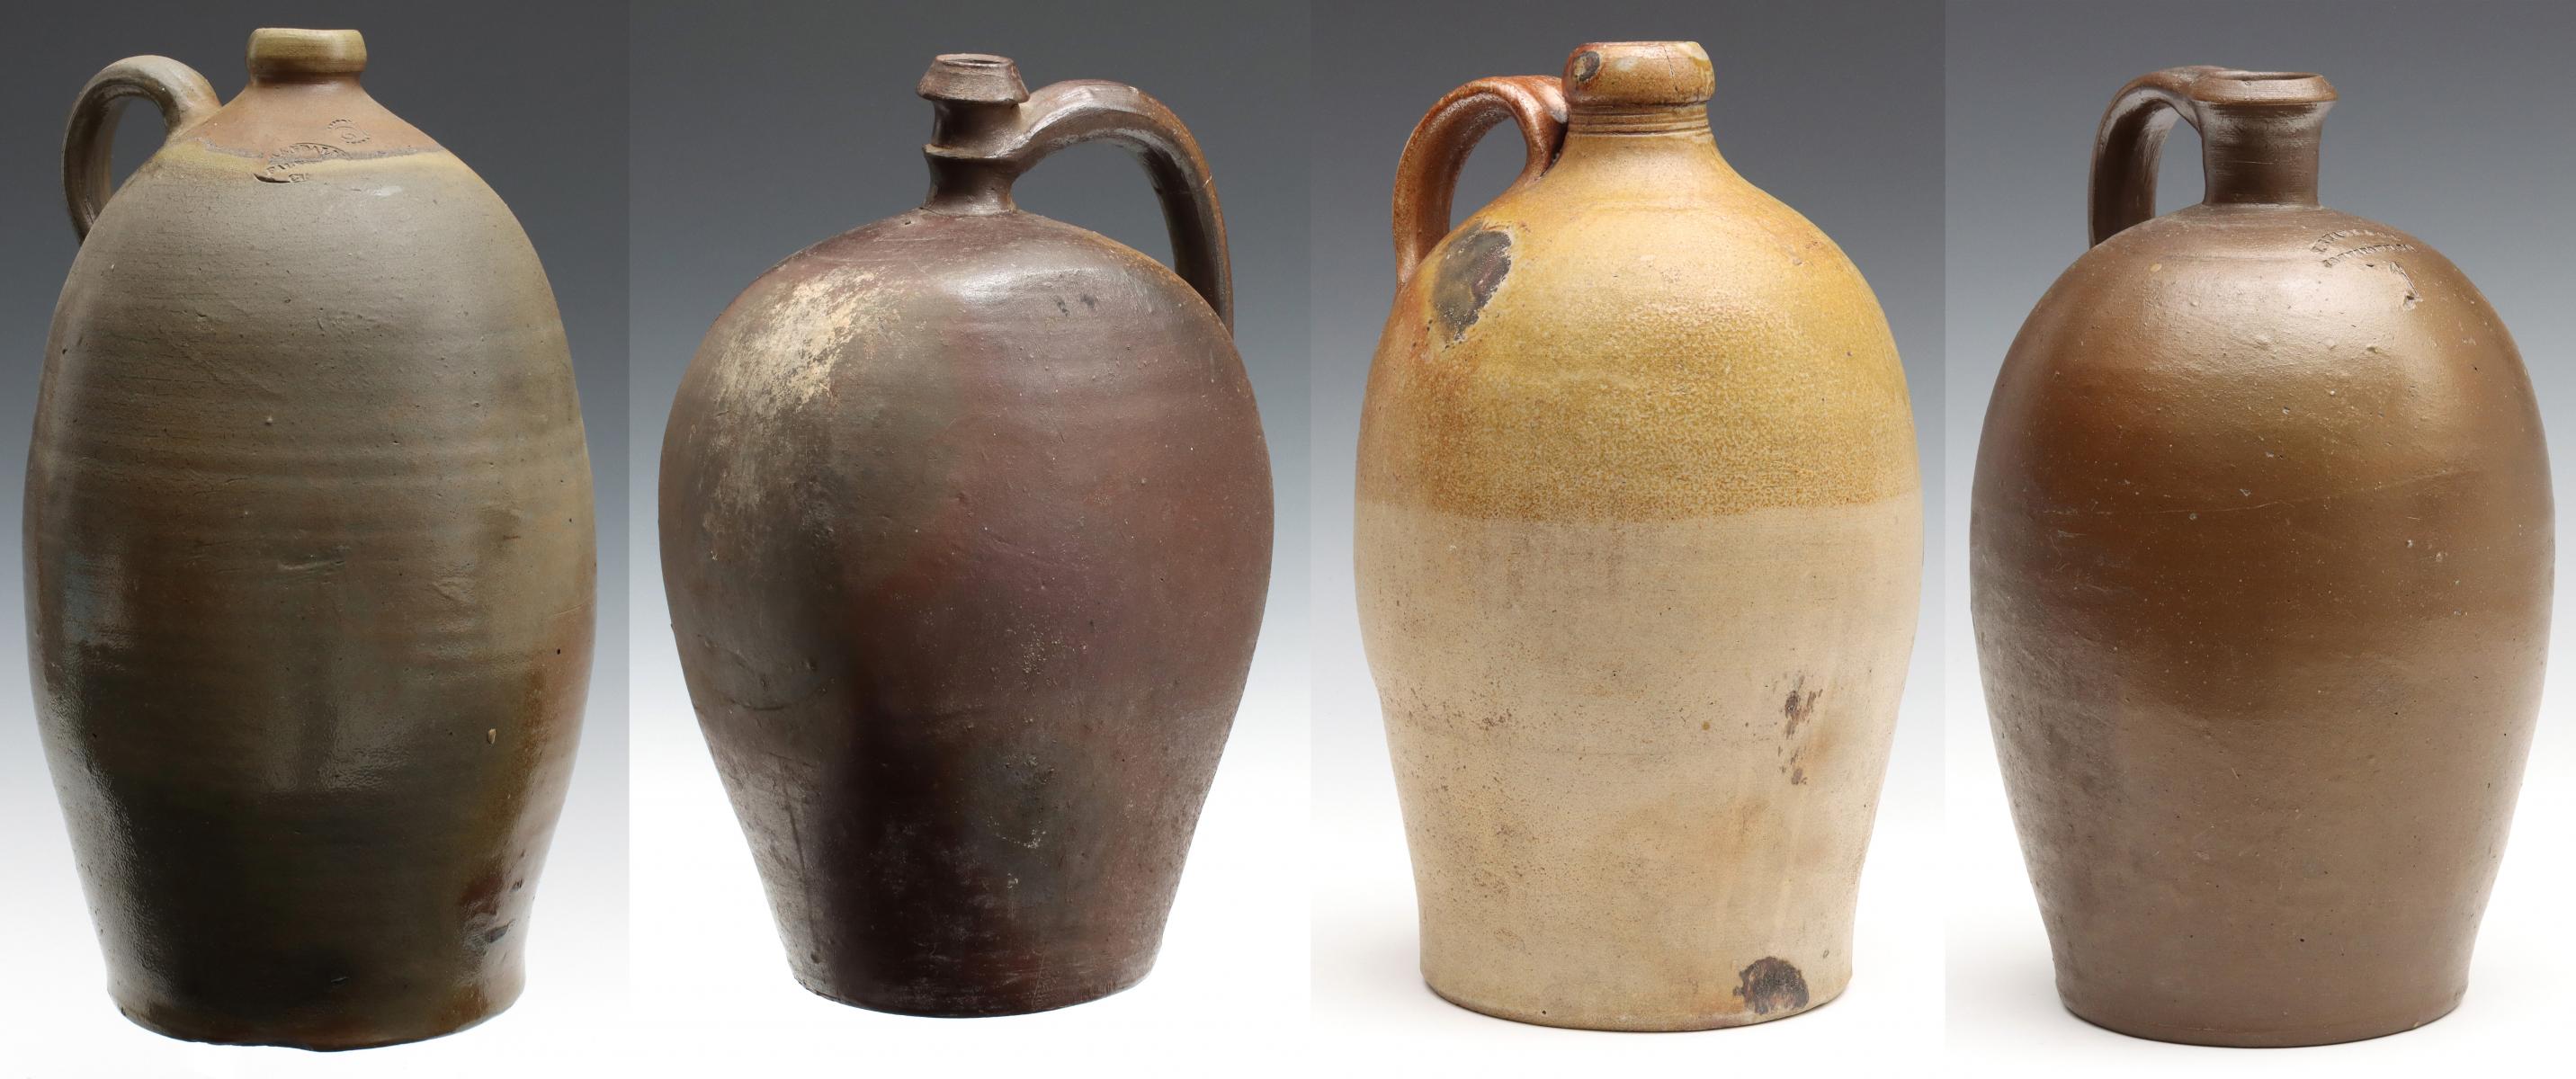 EARLY 19TH C. AMERICAN UNDECORATED STONEWARE JUGS